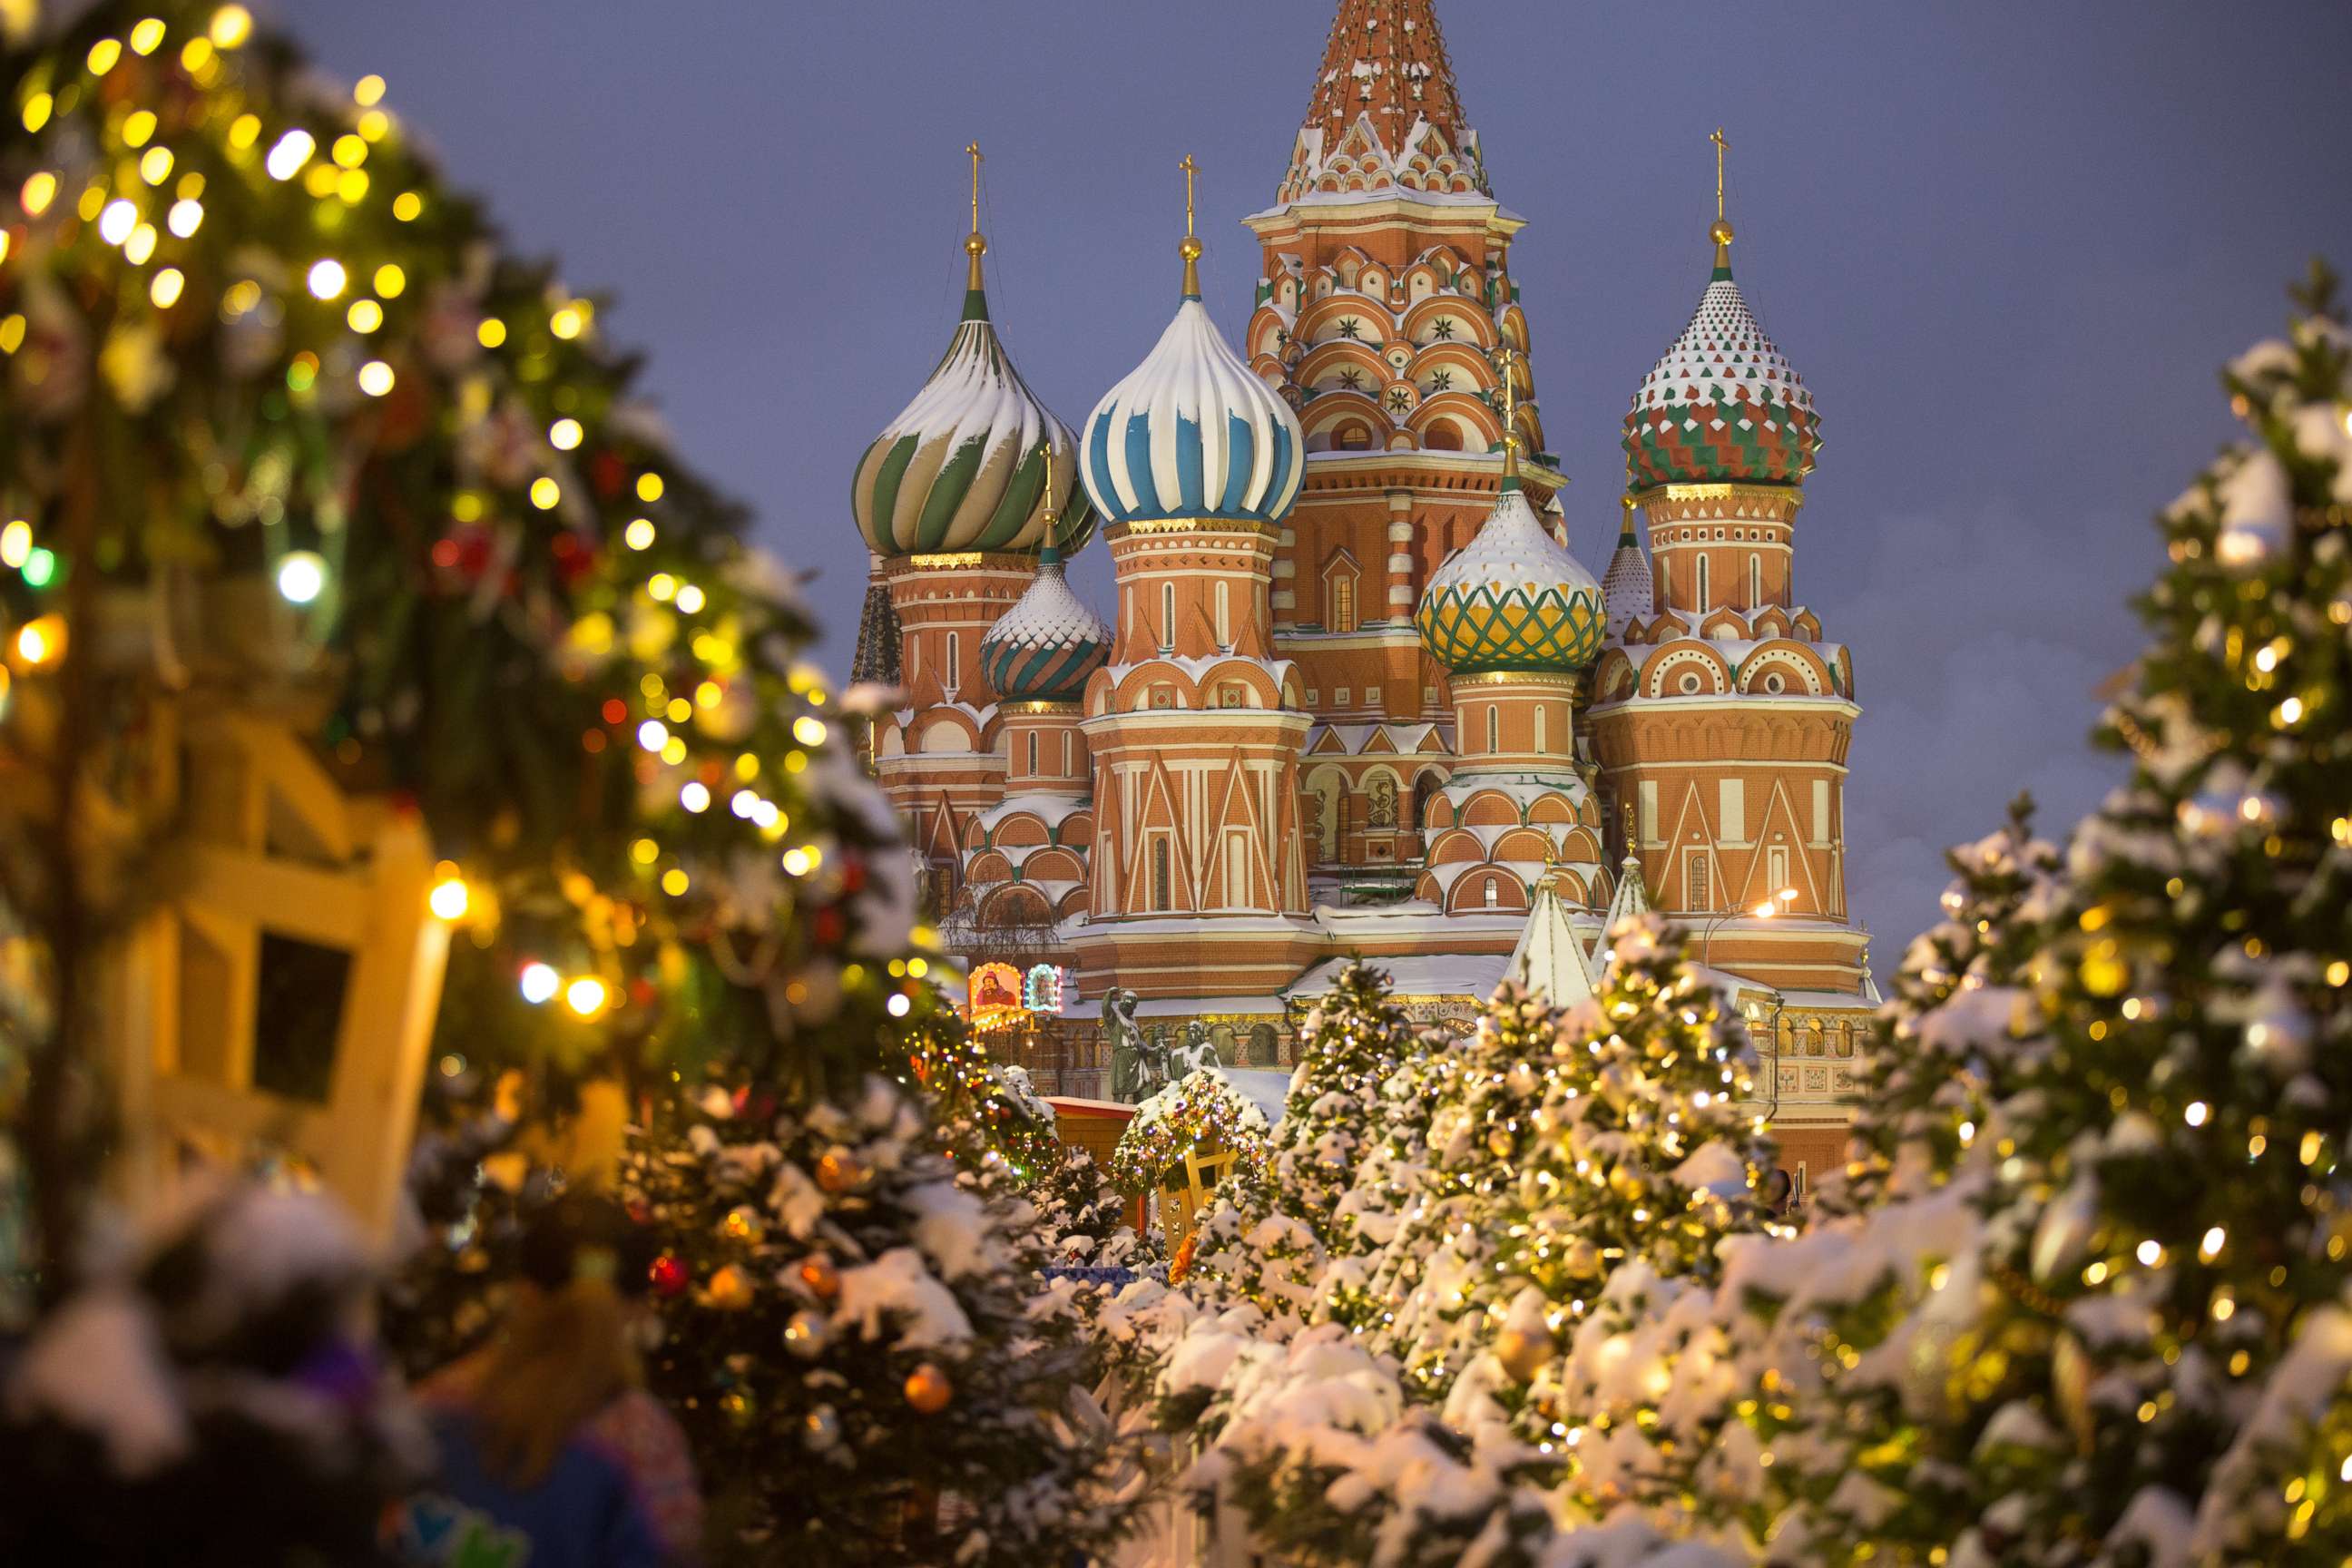 PHOTO: St. Basil's Cathedral stands among holiday decorations on Red Square in Moscow, on Dec. 27, 2018.